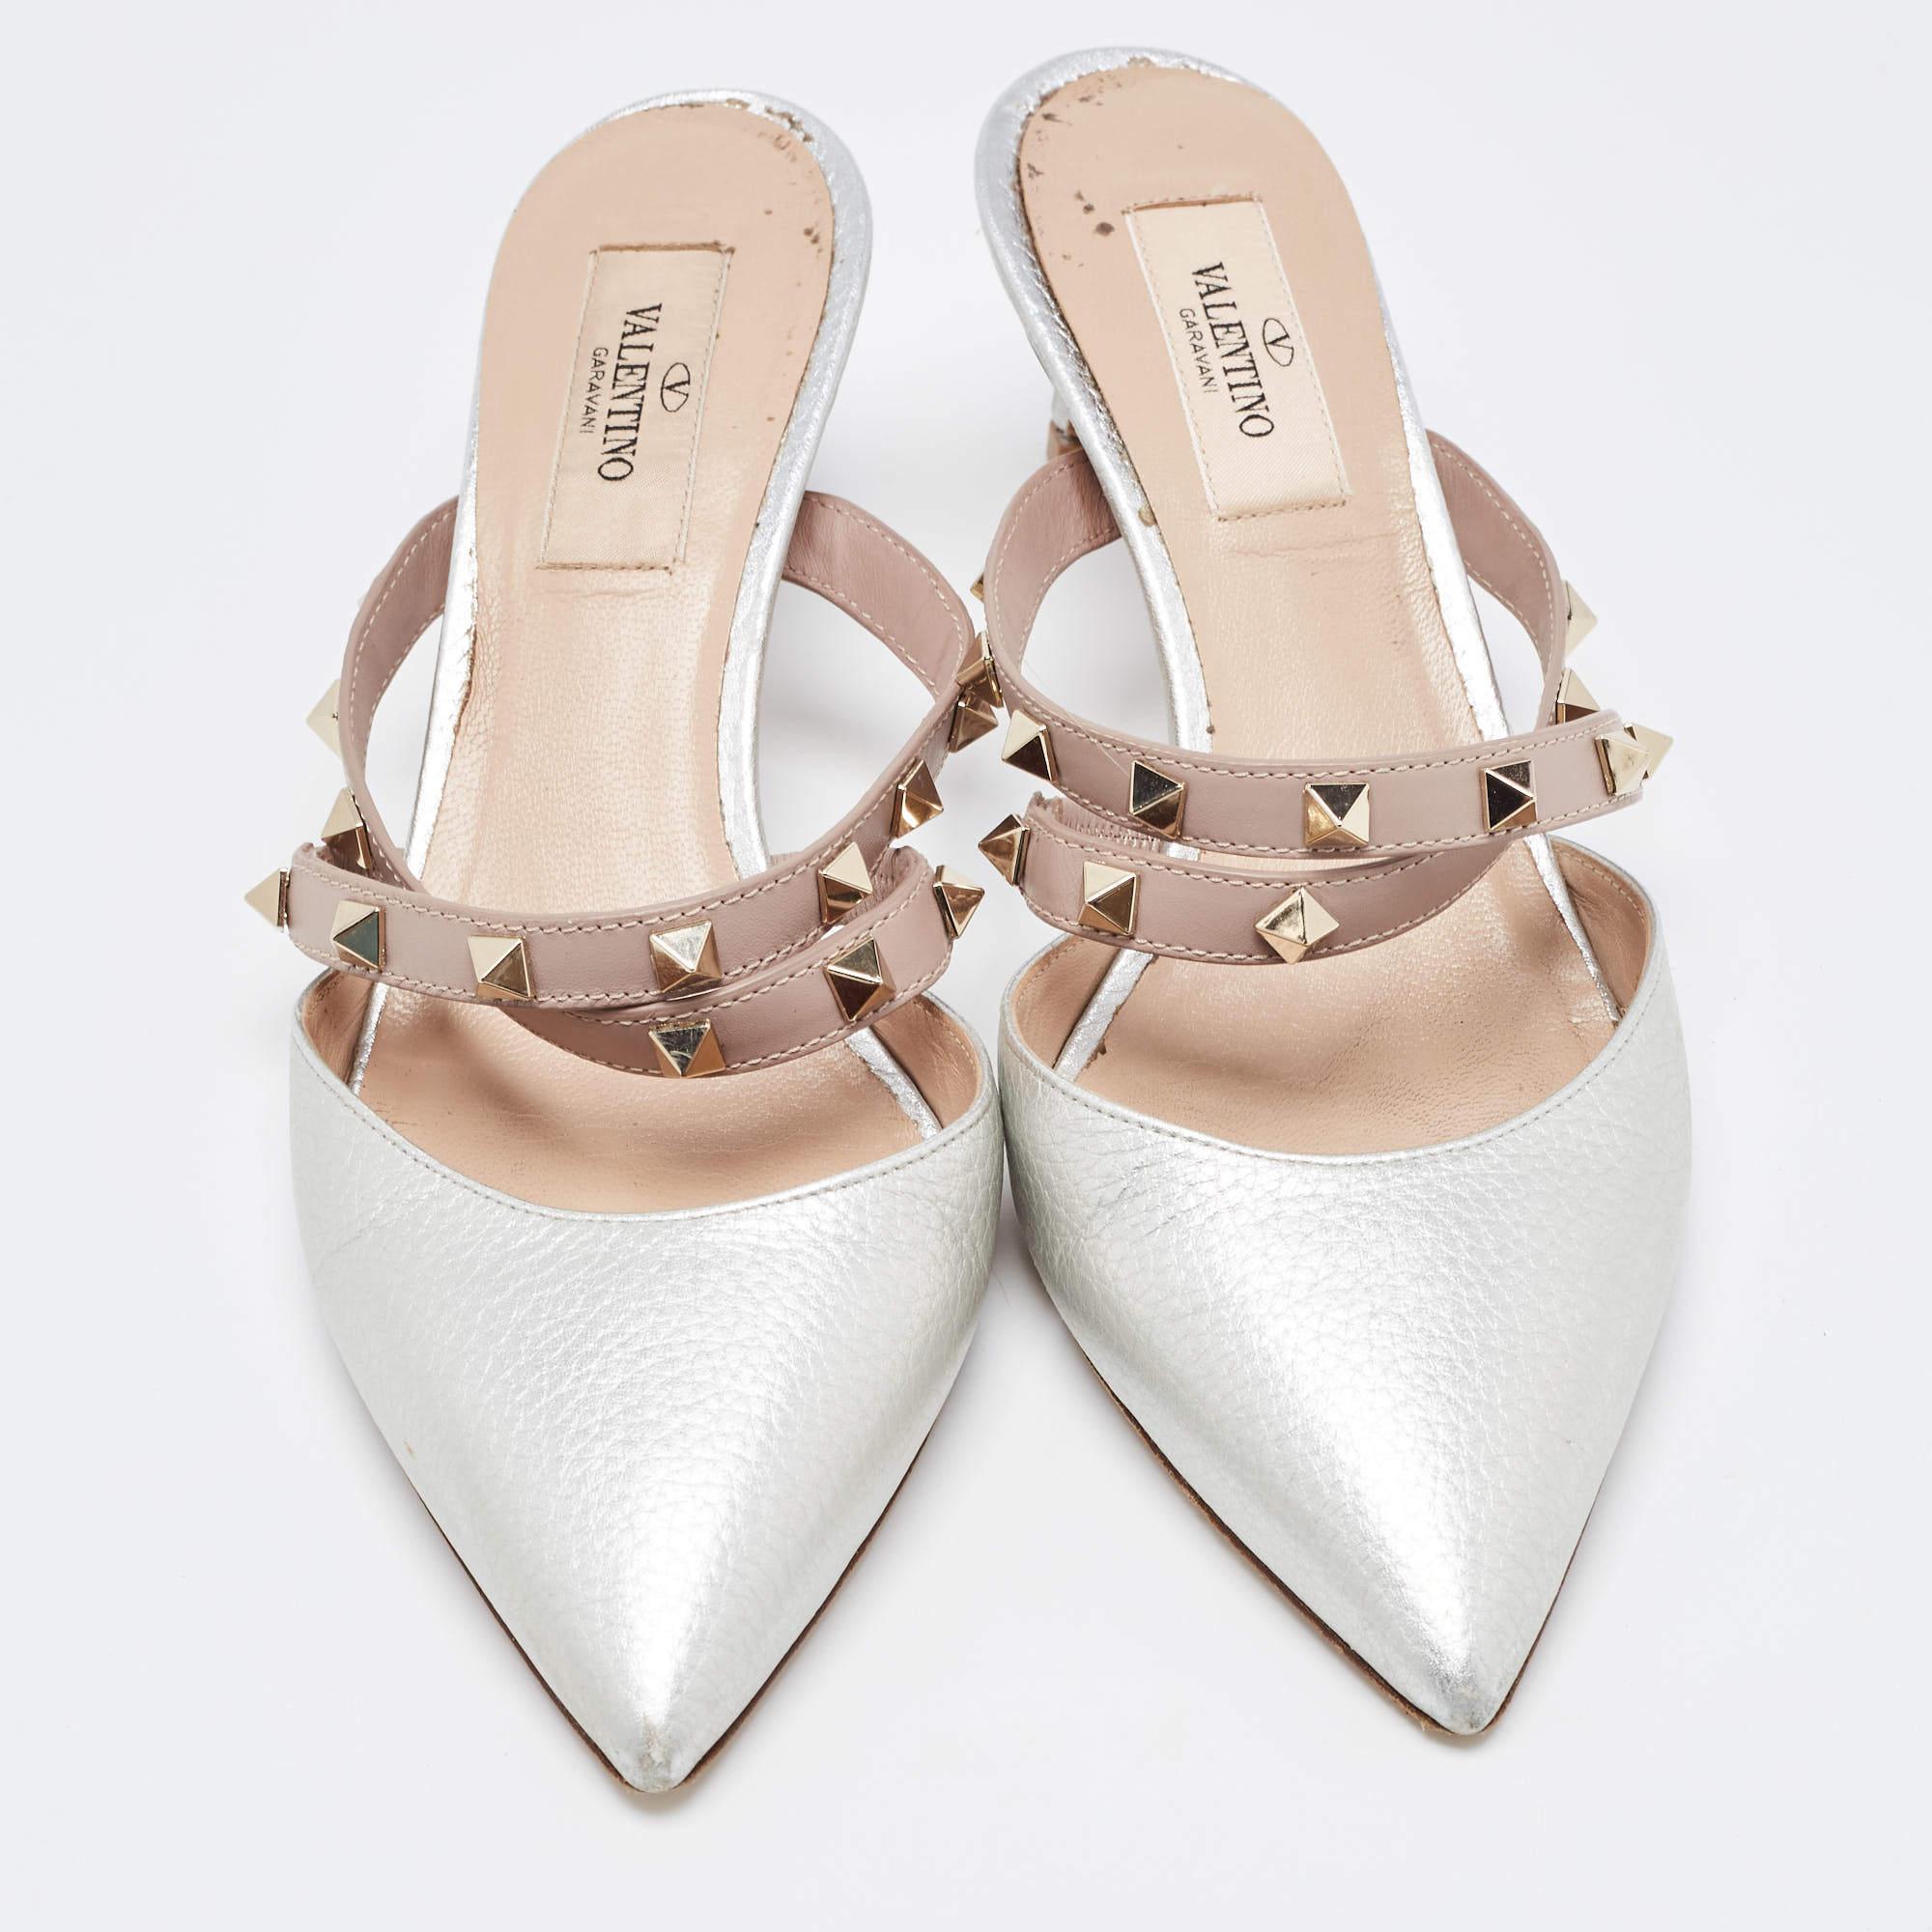 A perfect blend of luxury, style, and comfort, these designer mules are made using quality materials and frame your feet in the most elegant way. They can be paired with a host of outfits from your wardrobe.

Includes
Original Dustbag, Original Box,